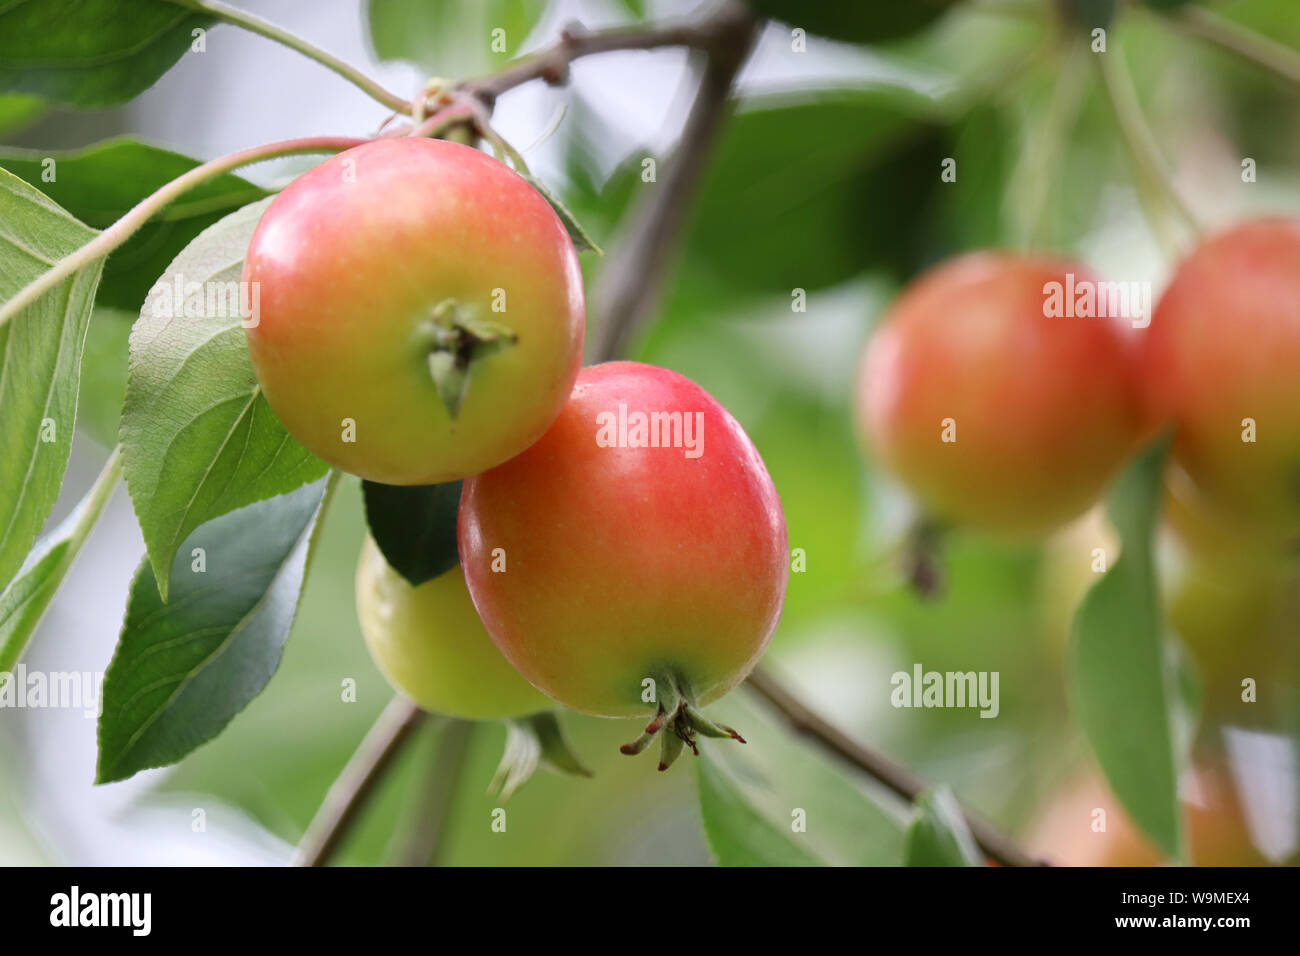 Red apples on a tree in a summer garden, selective focus. Ripe apple fruit hanging on branch with leaves Stock Photo